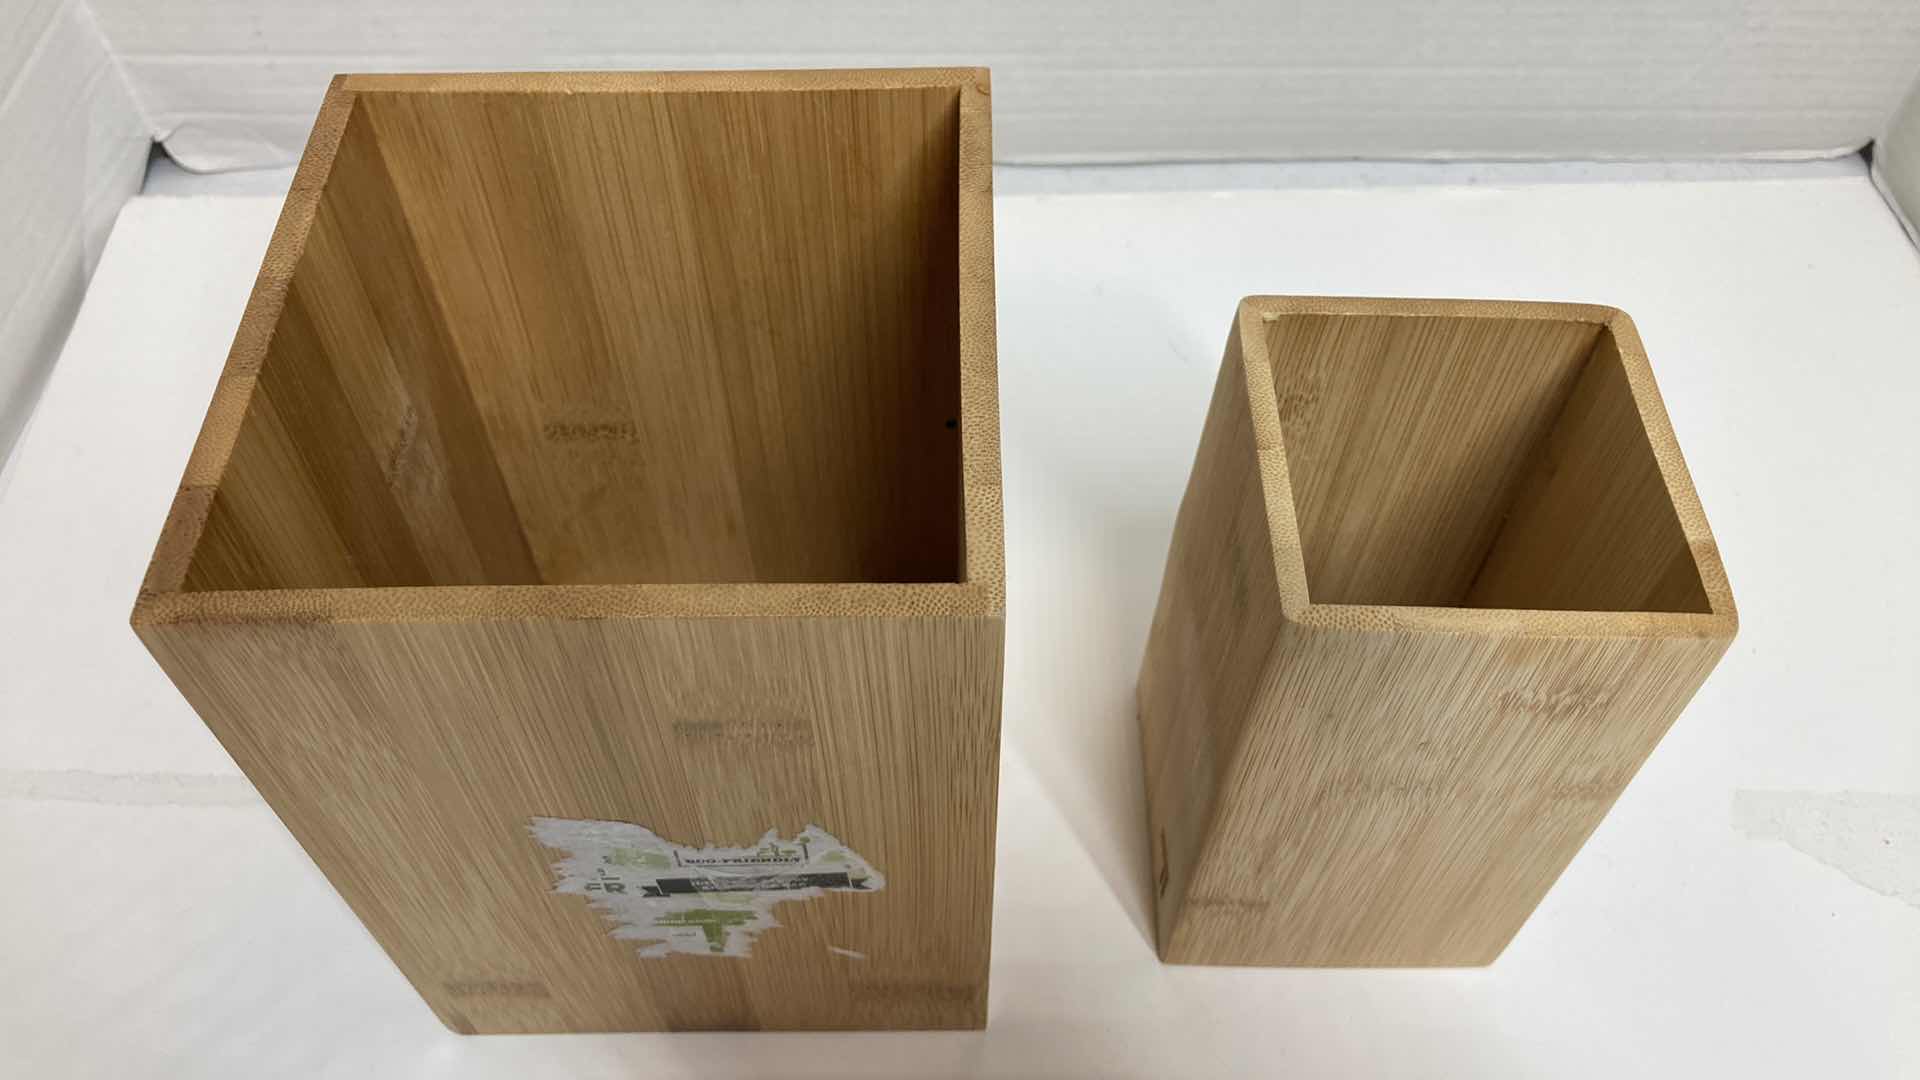 Photo 6 of NEW HANDMADE HOLIDAY CRAFT WOOD DECOR BOXES (3) W NATURAL WOOD BOXES (2)